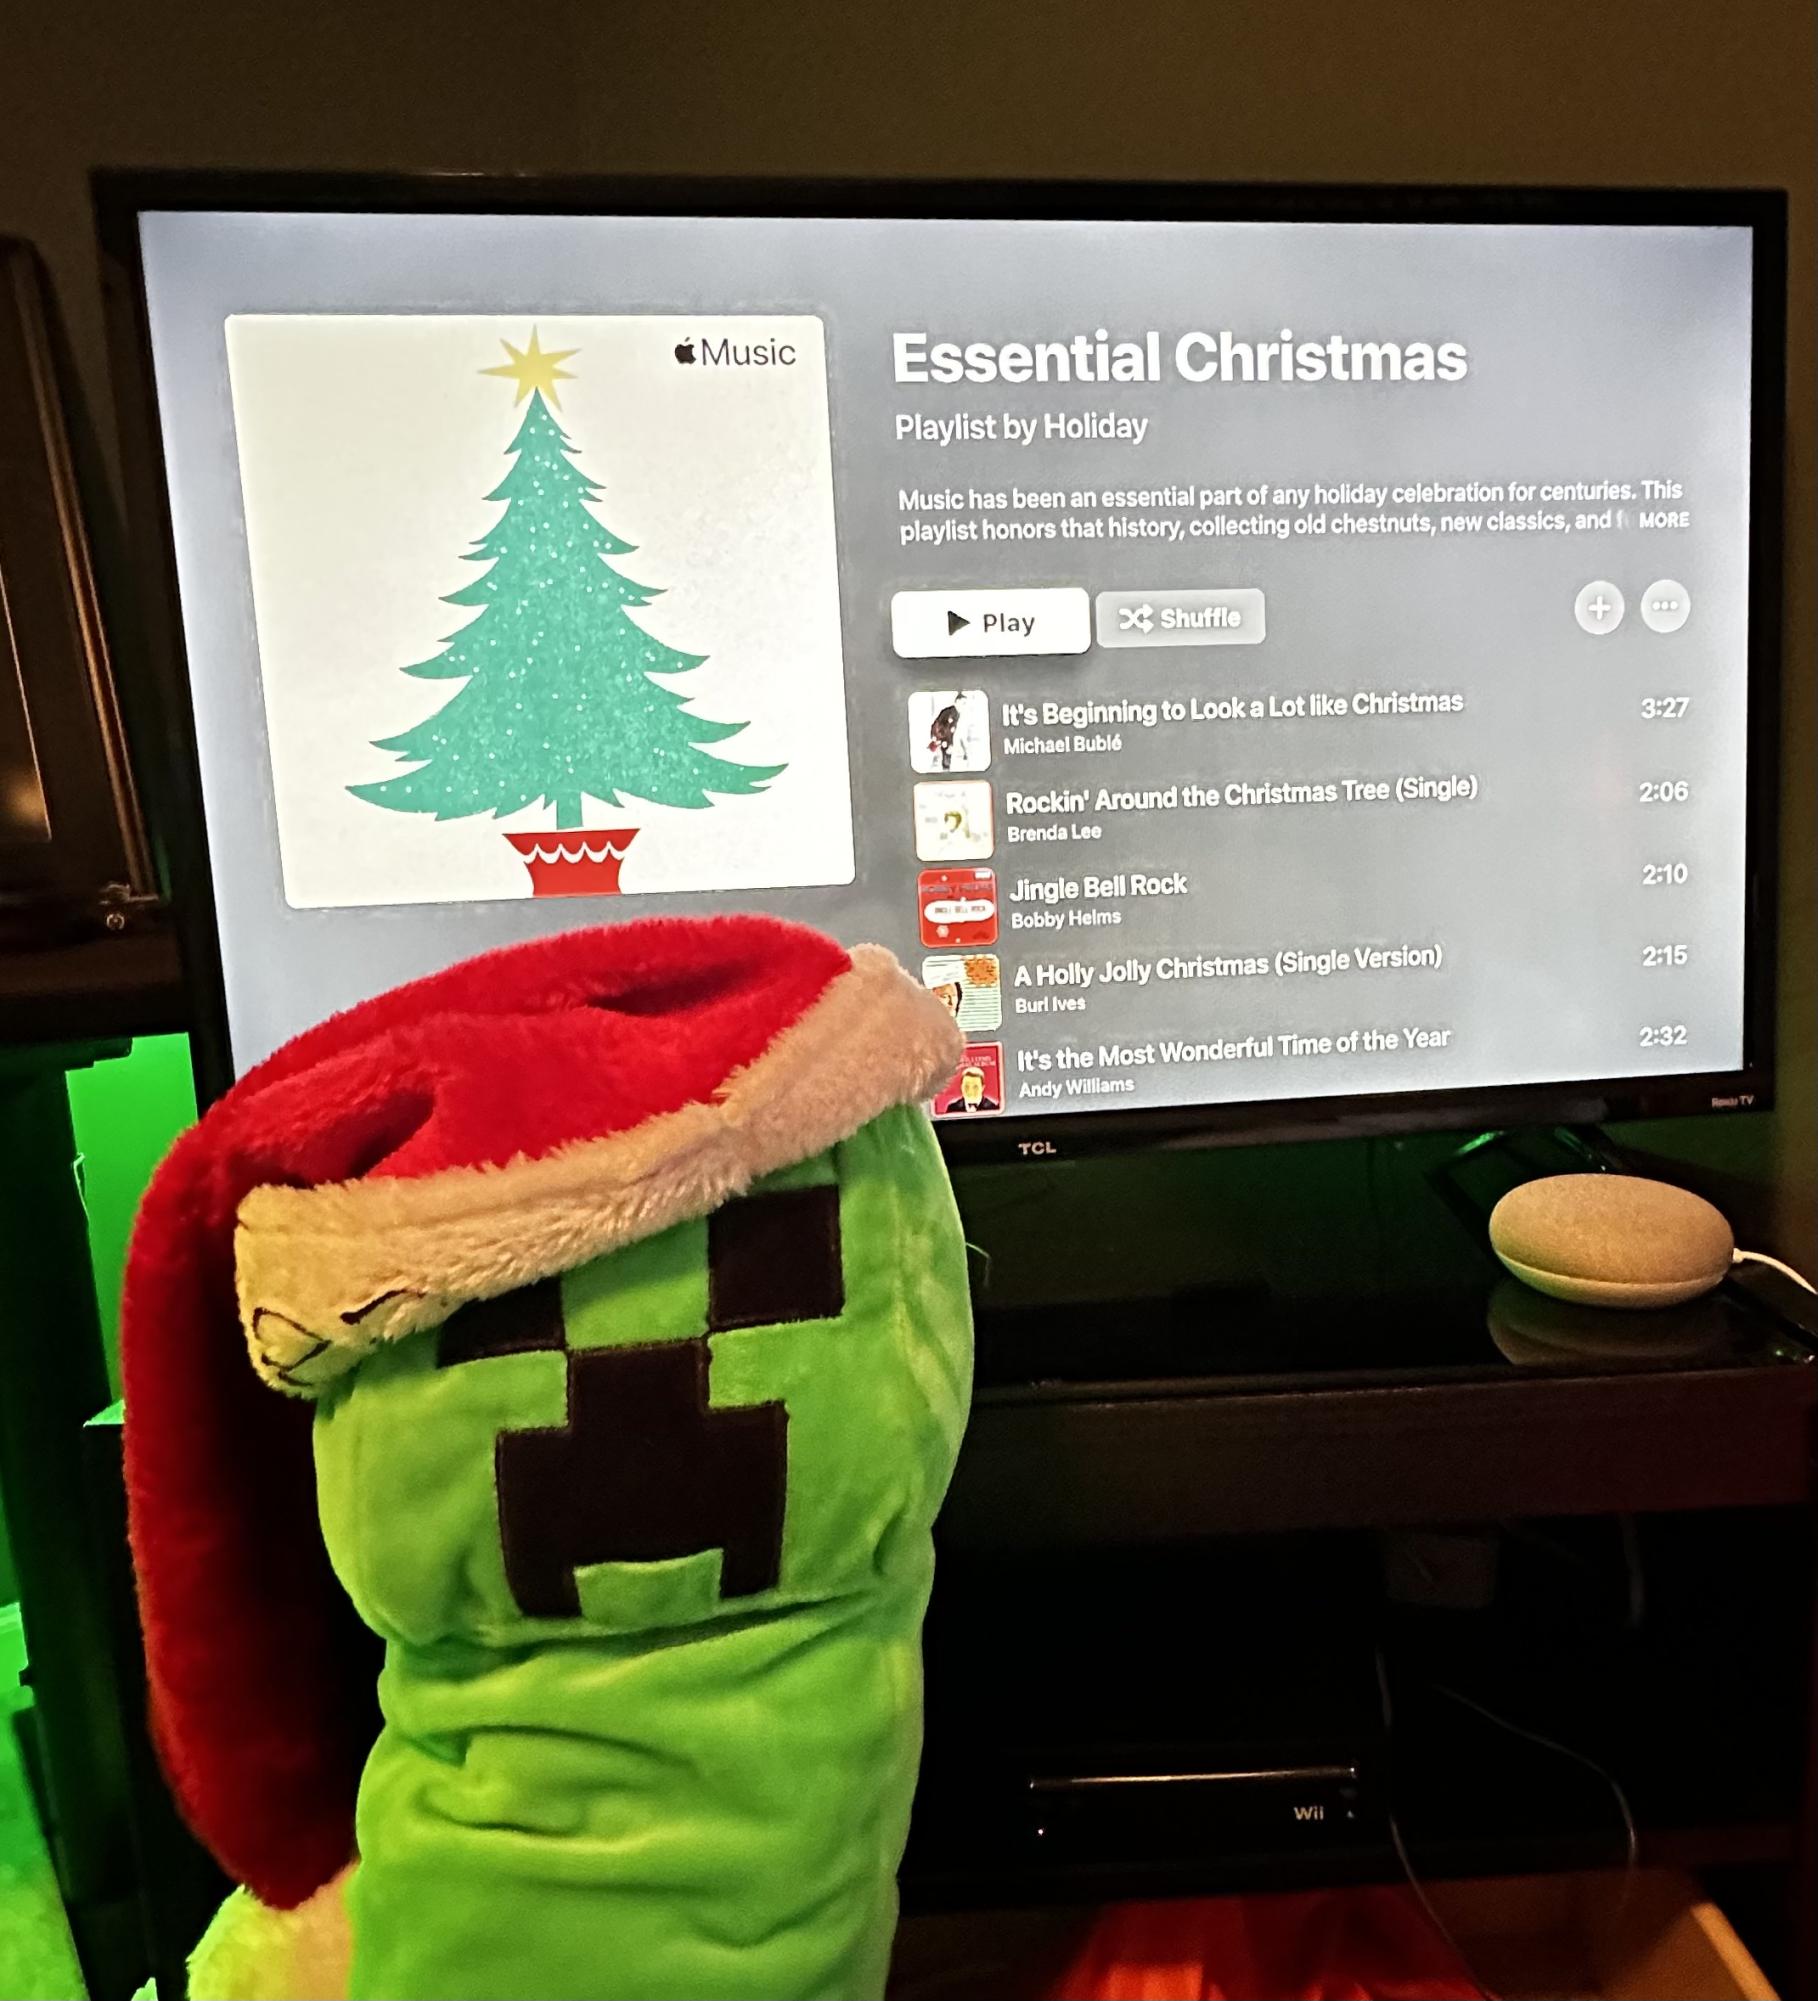 Creeper listening to some festive tunes